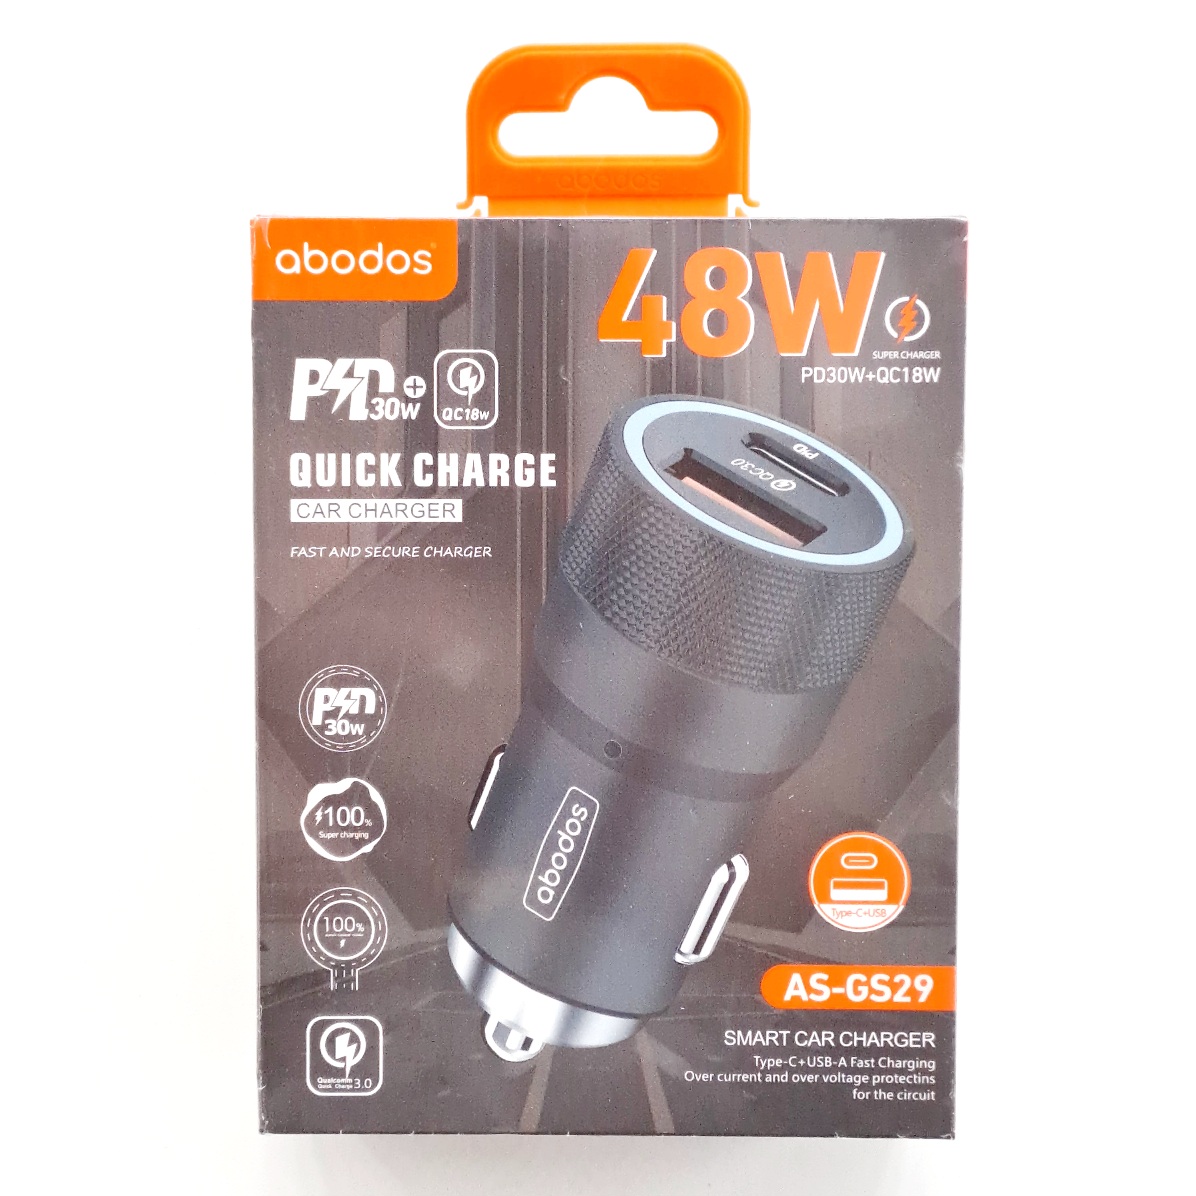 AS-GS29 abodos 48W (USB-AM + USB-CM) Quick Charge Car Charger